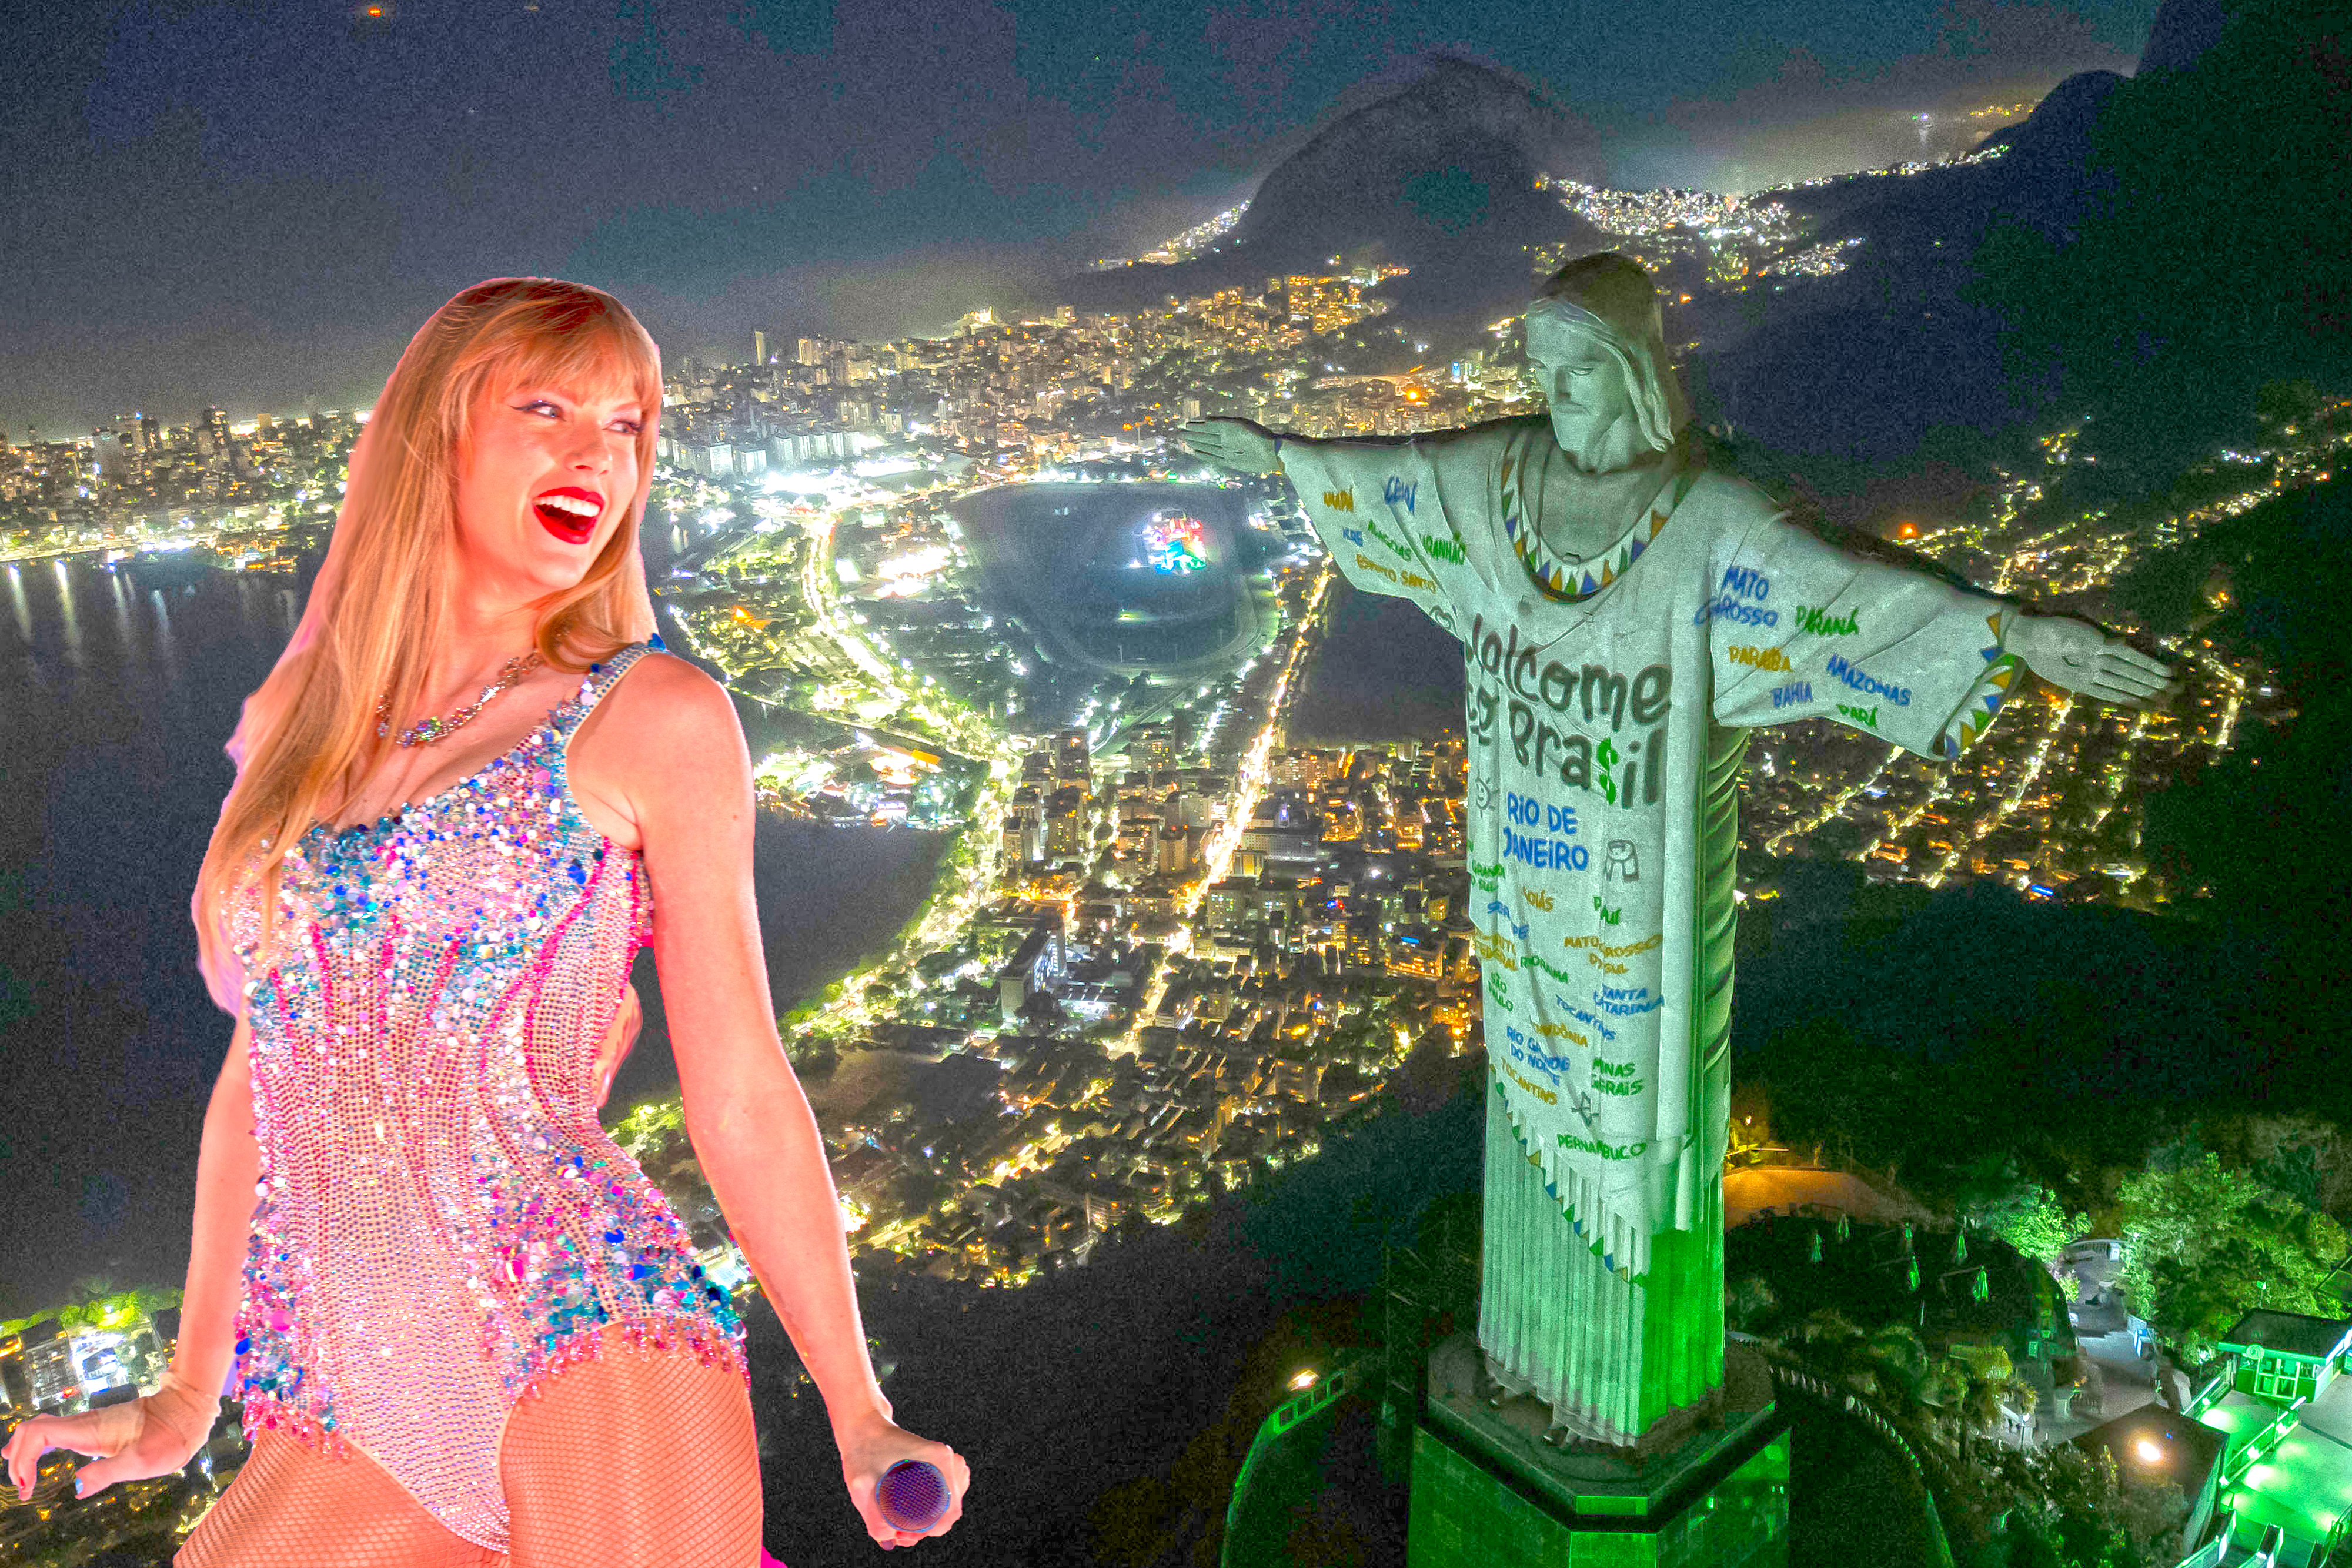 Taylor Swift honored on Christ the Redeemer statue